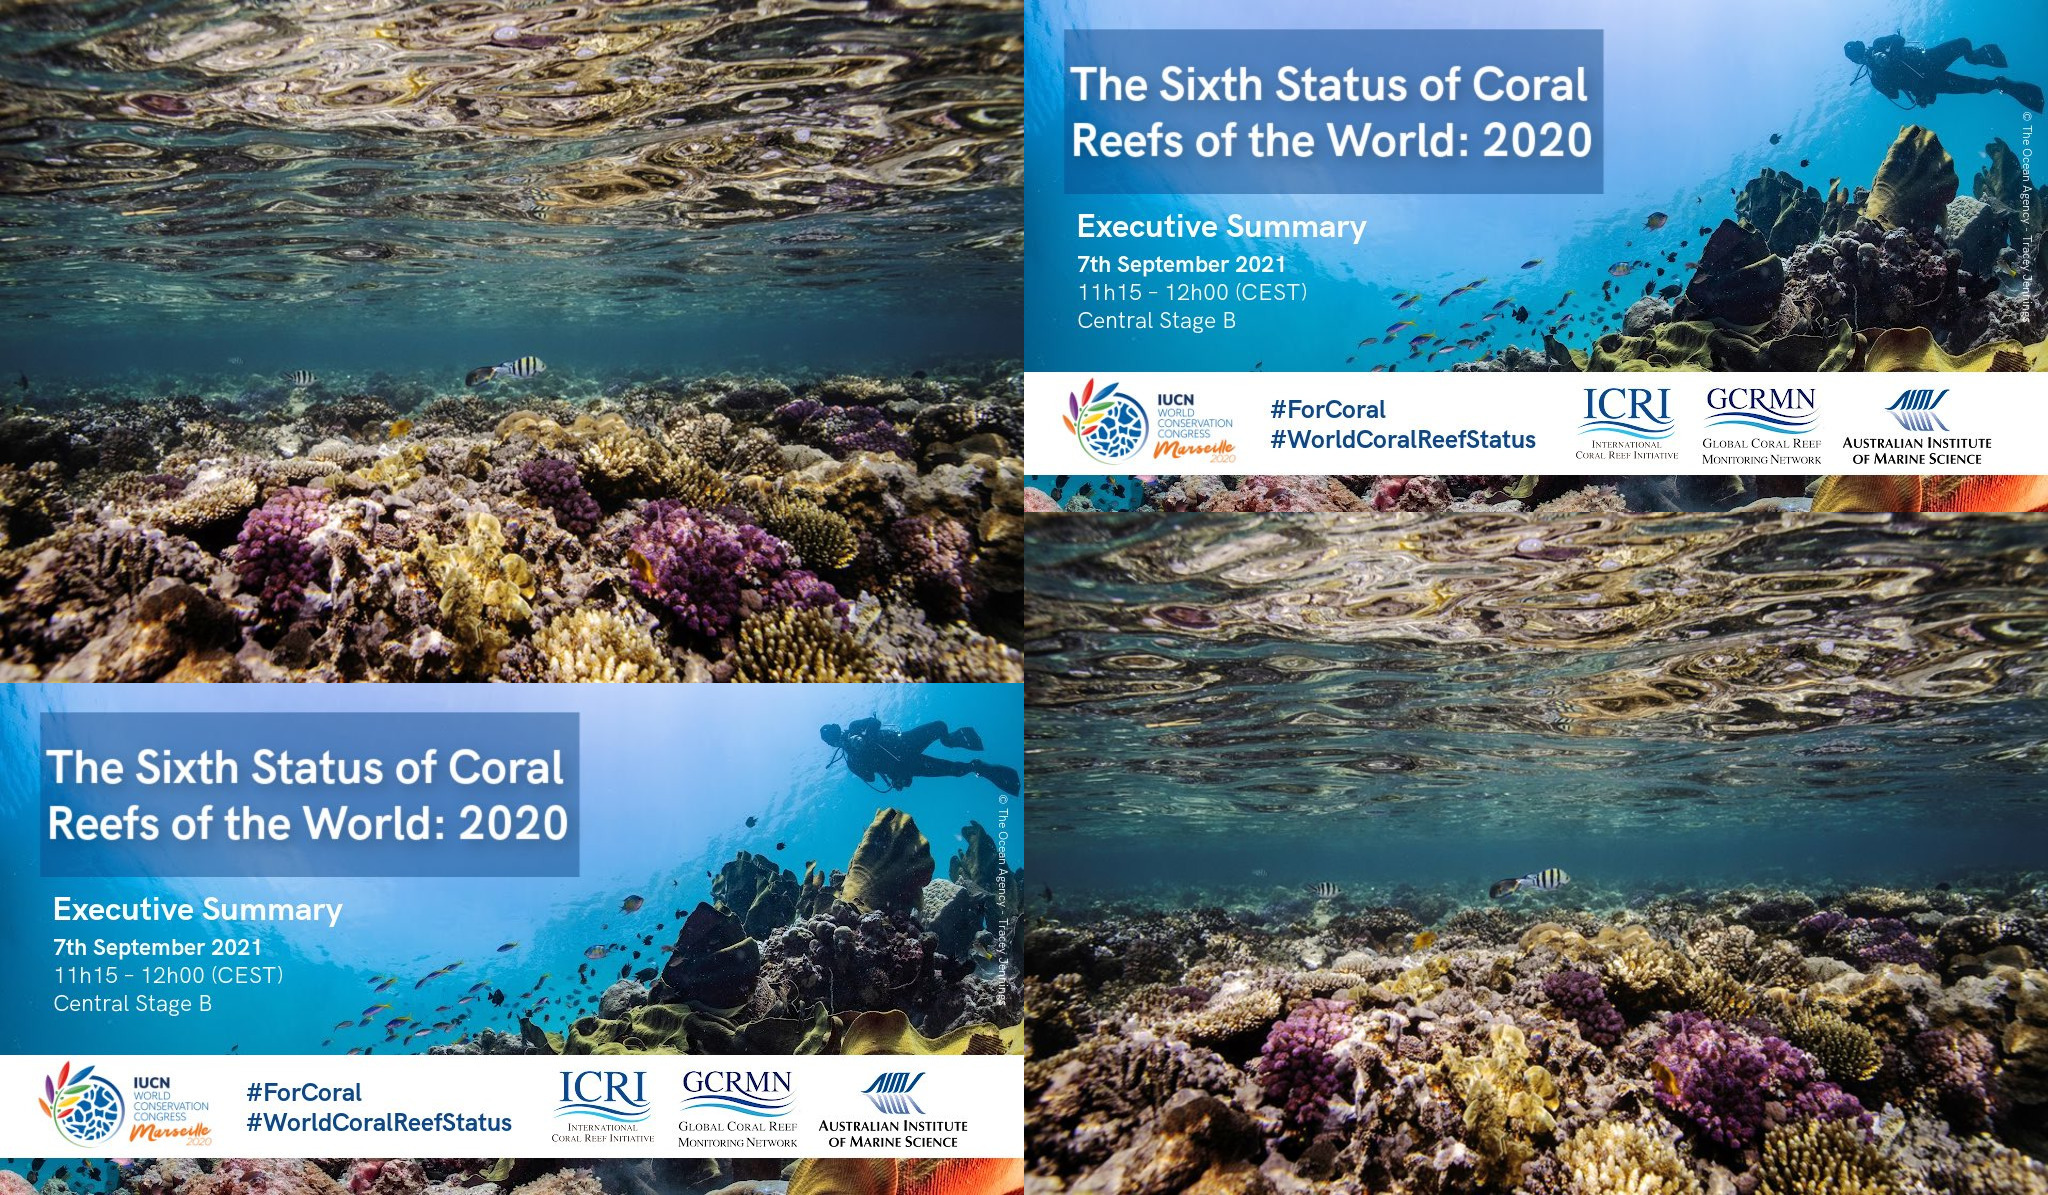 Climate Change Is Killing The World's Coral Reefs As Oceans Warm, Study Shows